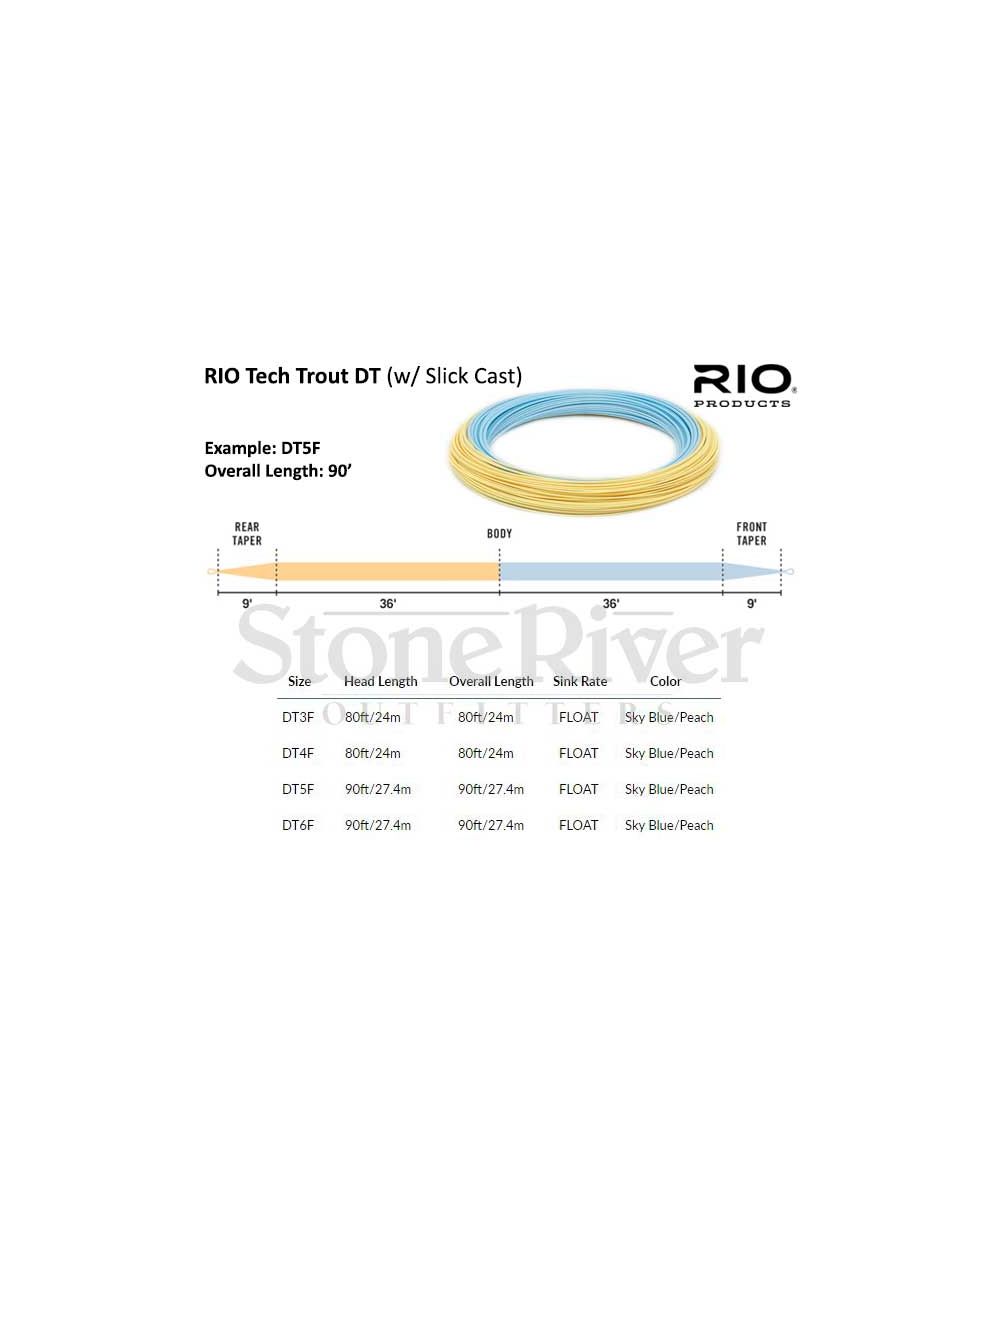 RIO Technical Trout DT Fly Lines (w/ Slick Cast)